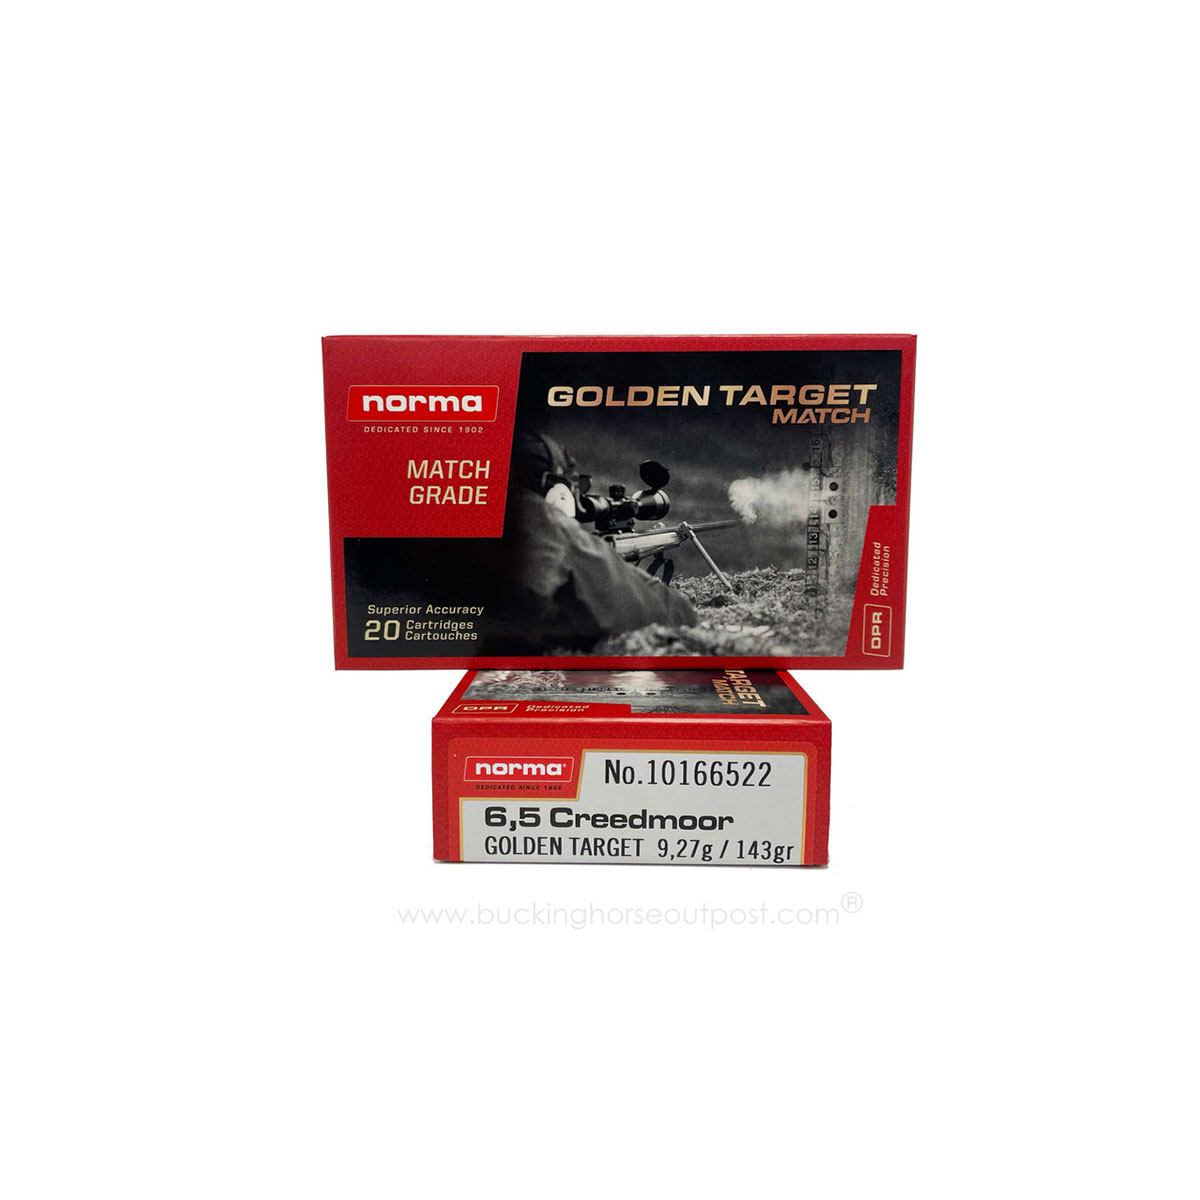 NORMA - MATCH AMMO 6.5 CREEDMOOR 143GR HOLLOW POINT BOAT TAIL